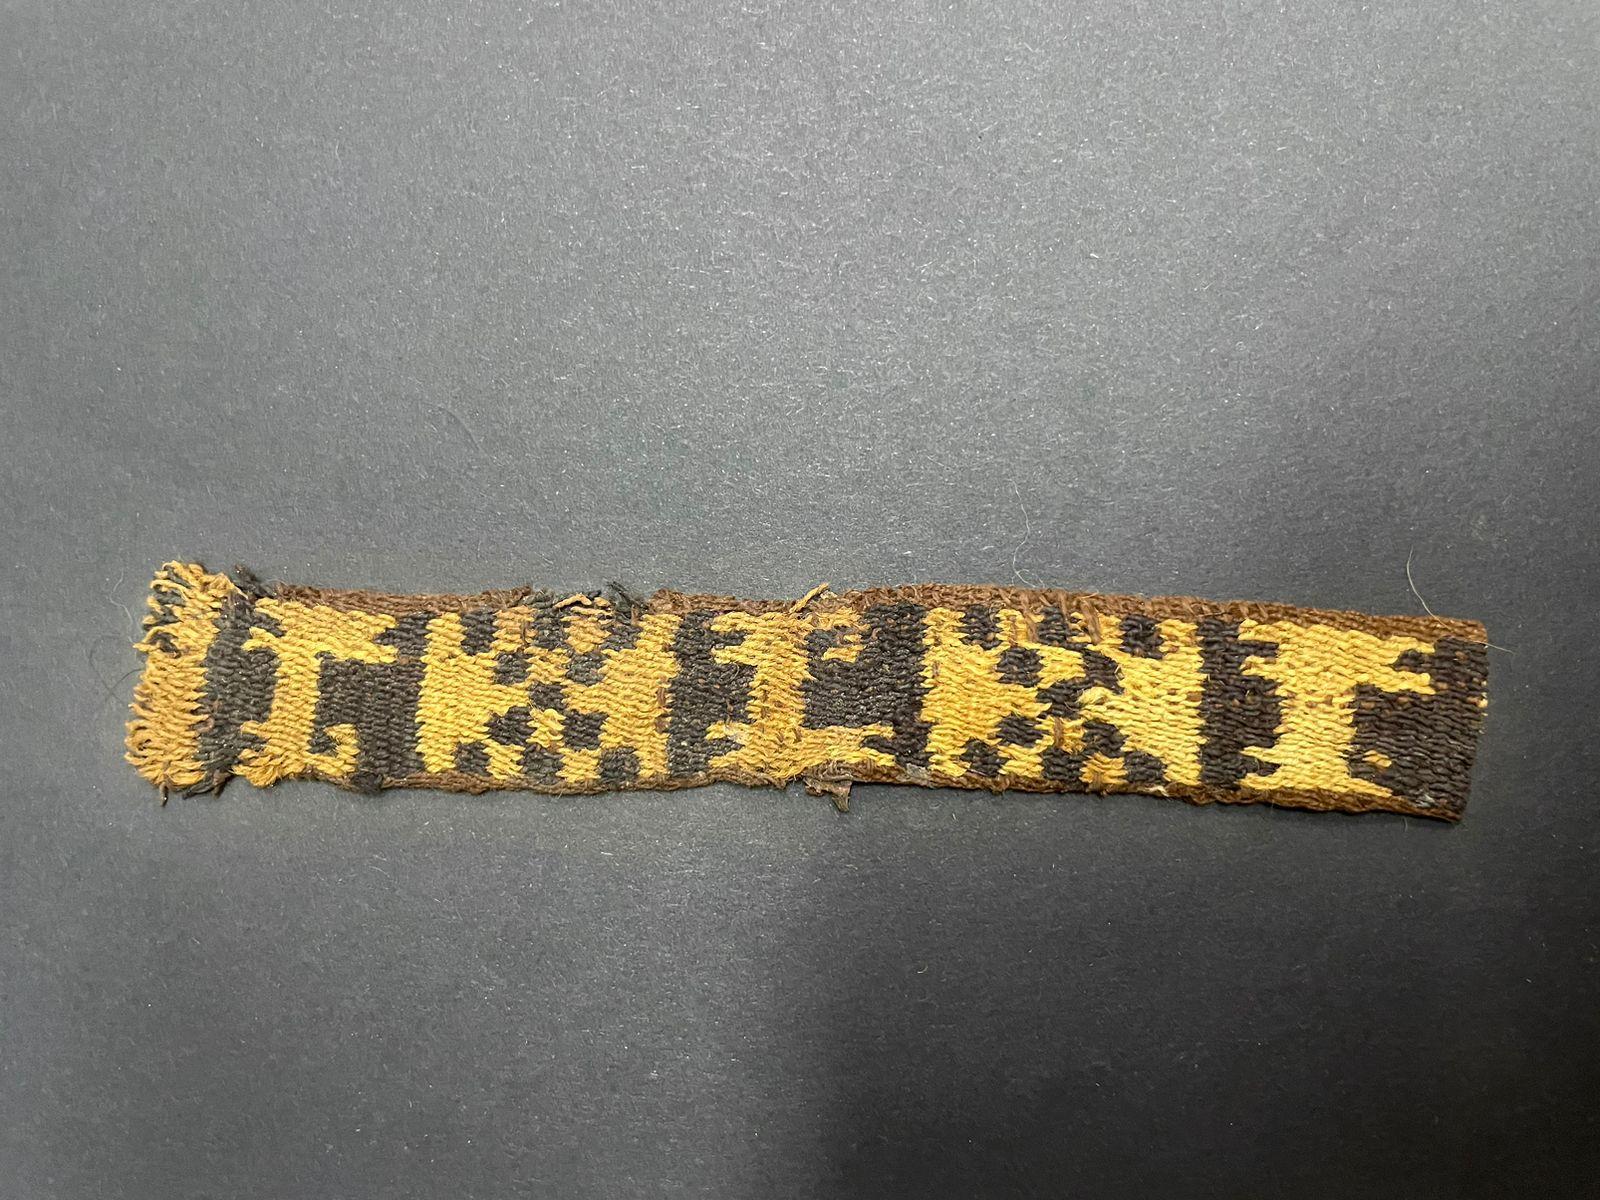  Pre-Columbian  Inka Textile Fragment - Peru, Ex Ferdinand Anton decorated with checkerboard and llama designs. 
It is a wonder to behold antiquities such as a Pre-Columbian Textiles, an authentic piece of art that has been preserved for centuries